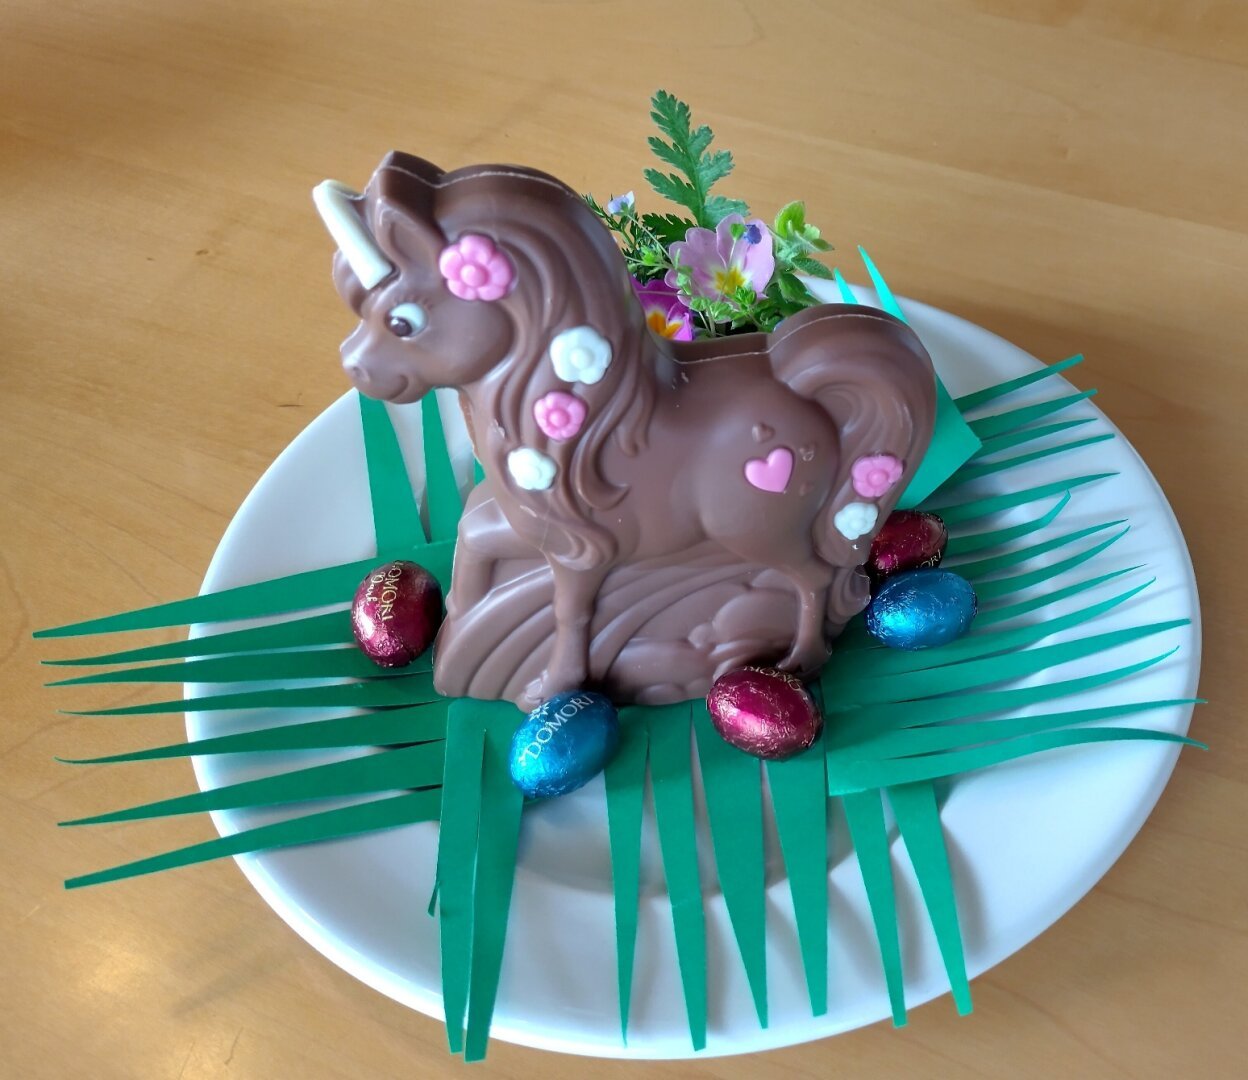 an image or two from my Pixelfed, shows a unicorn made of chocolate surrounded by some easter chocolate eggs